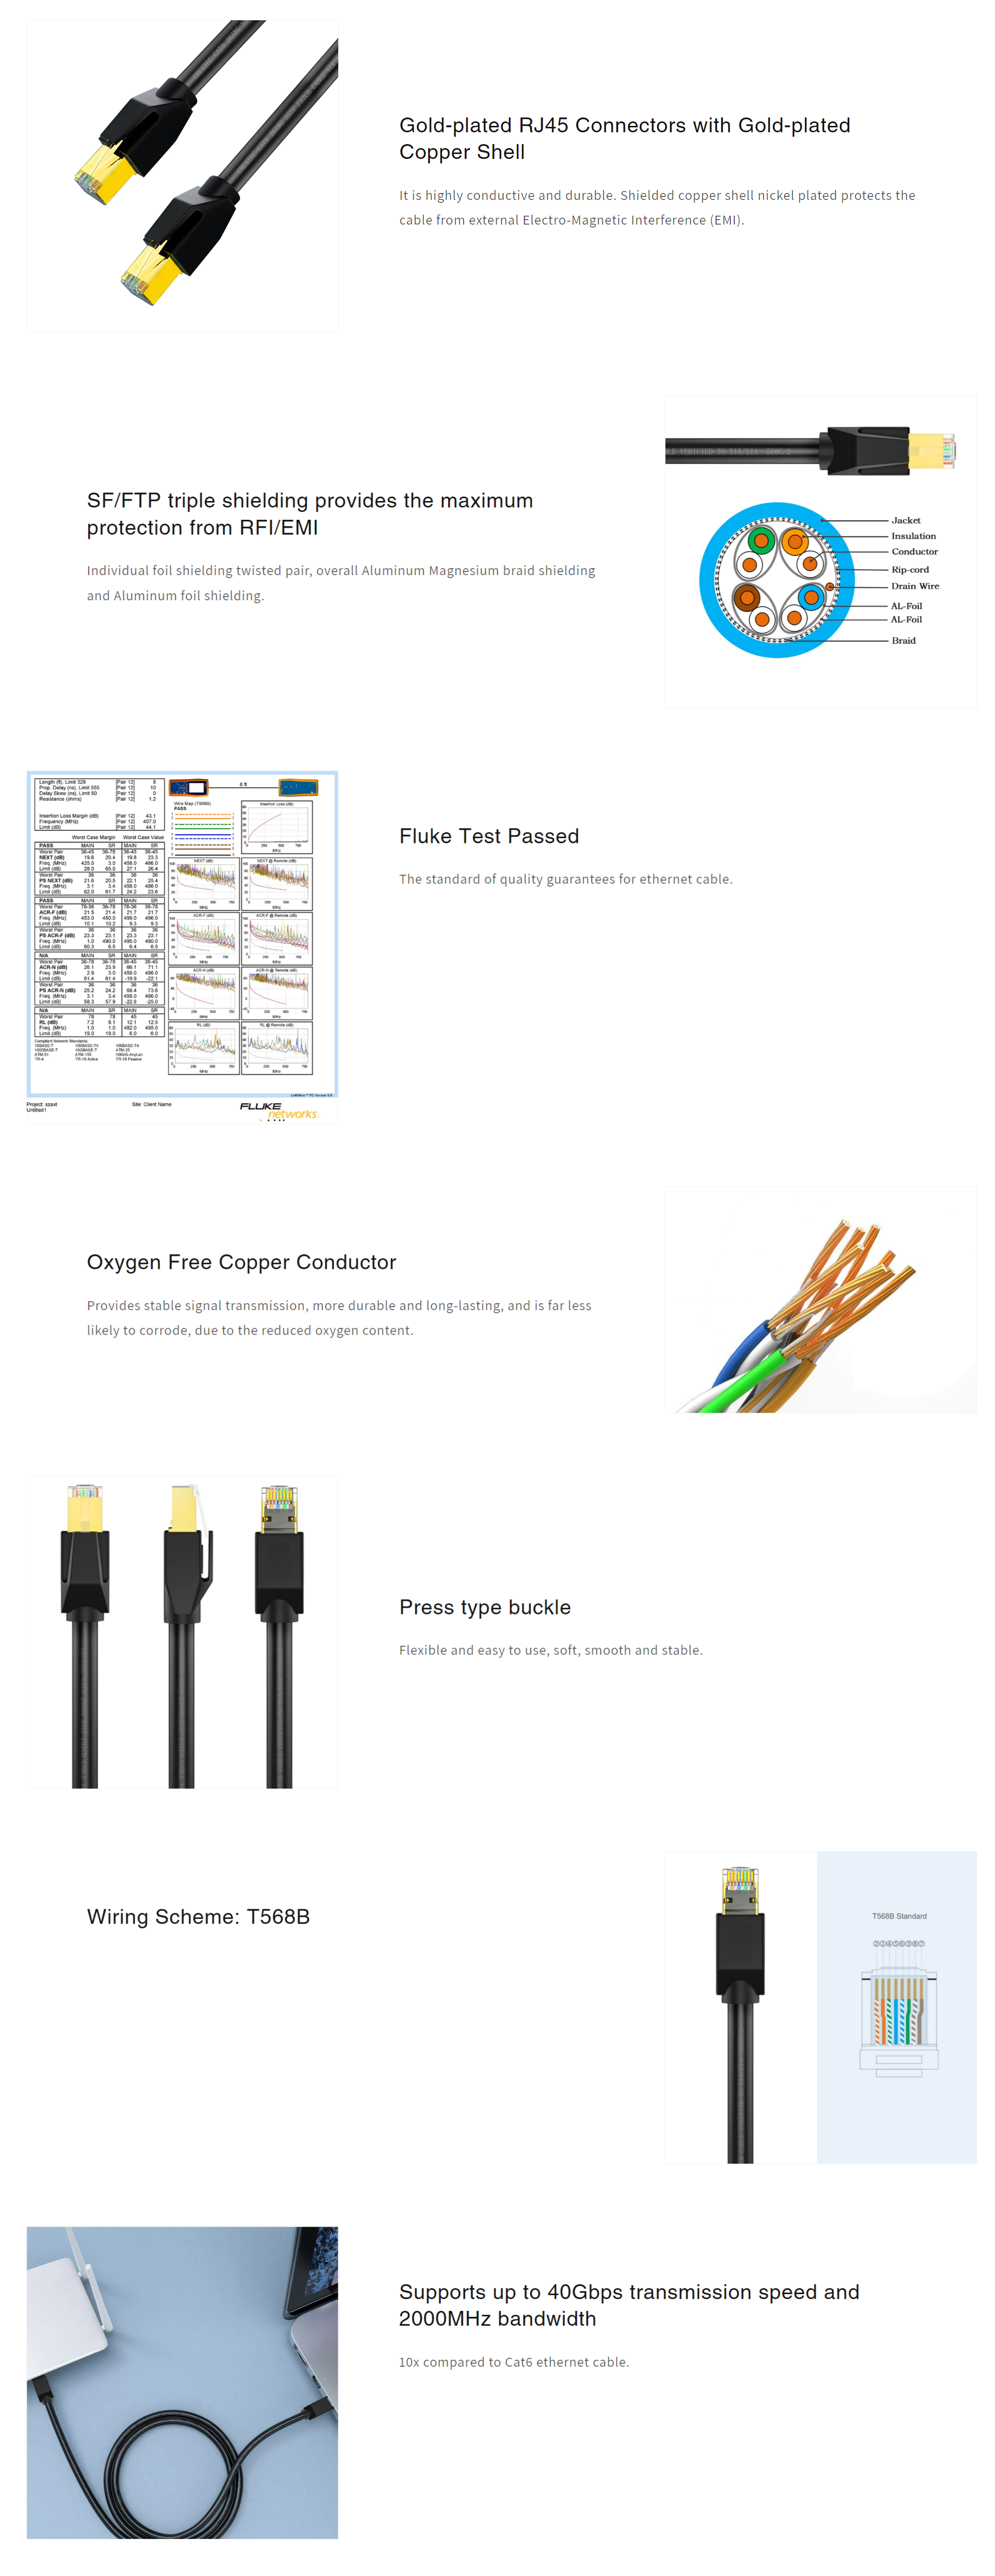 A large marketing image providing additional information about the product Cruxtec CAT8 20m 40GbE SF/FTP Triple Shielding Ethernet Cable Black - Additional alt info not provided